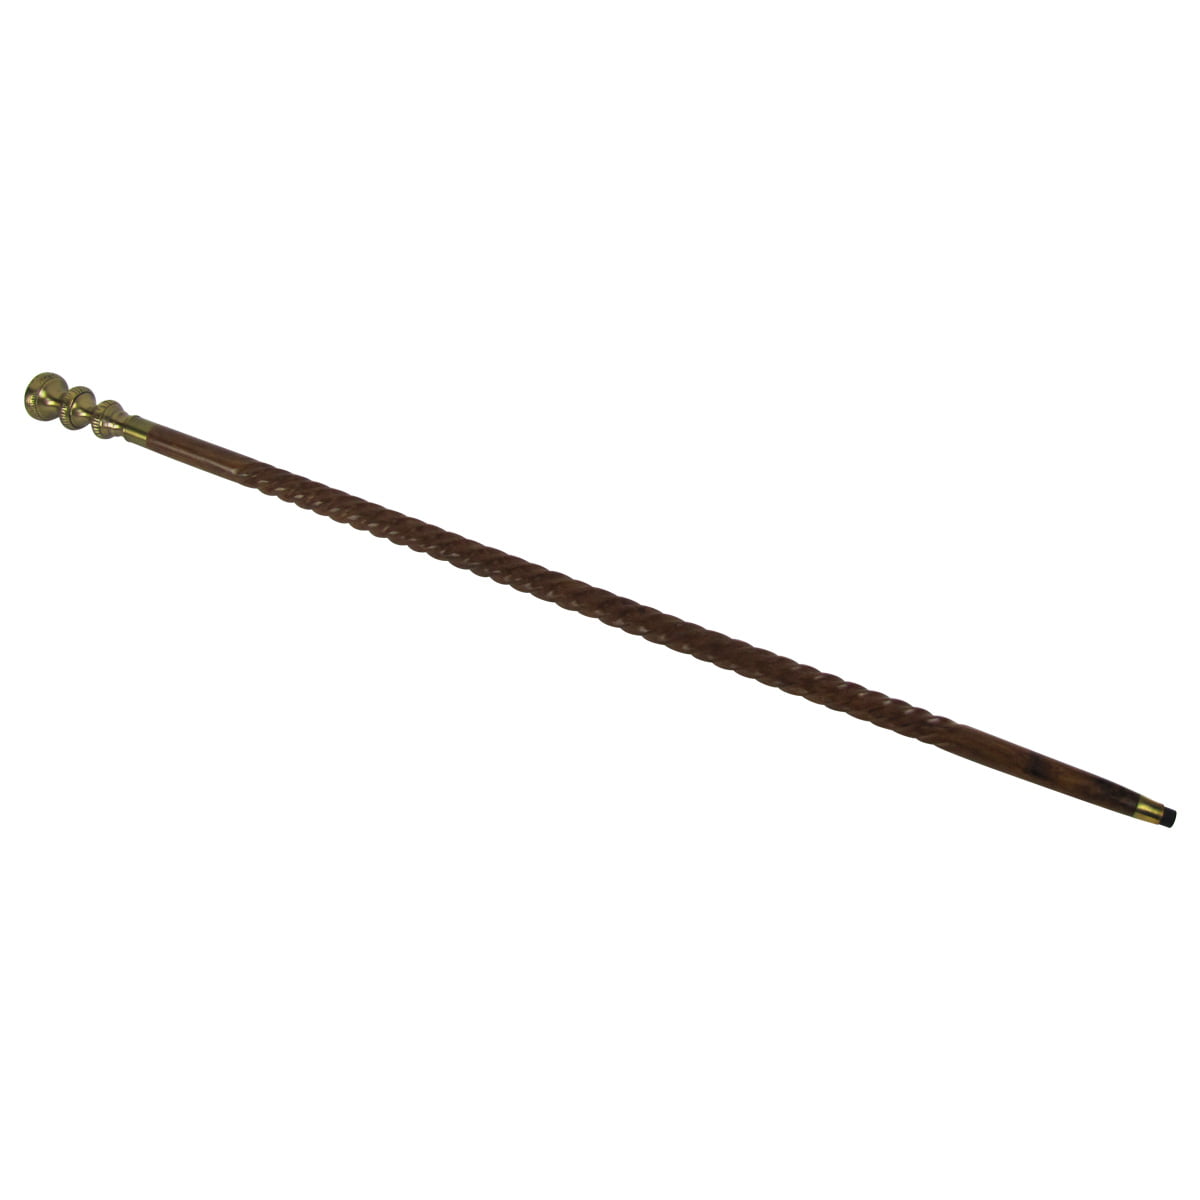 Details about   Solid Brass Handle walking Stick Style wooden Cane Wooden Walking stick 